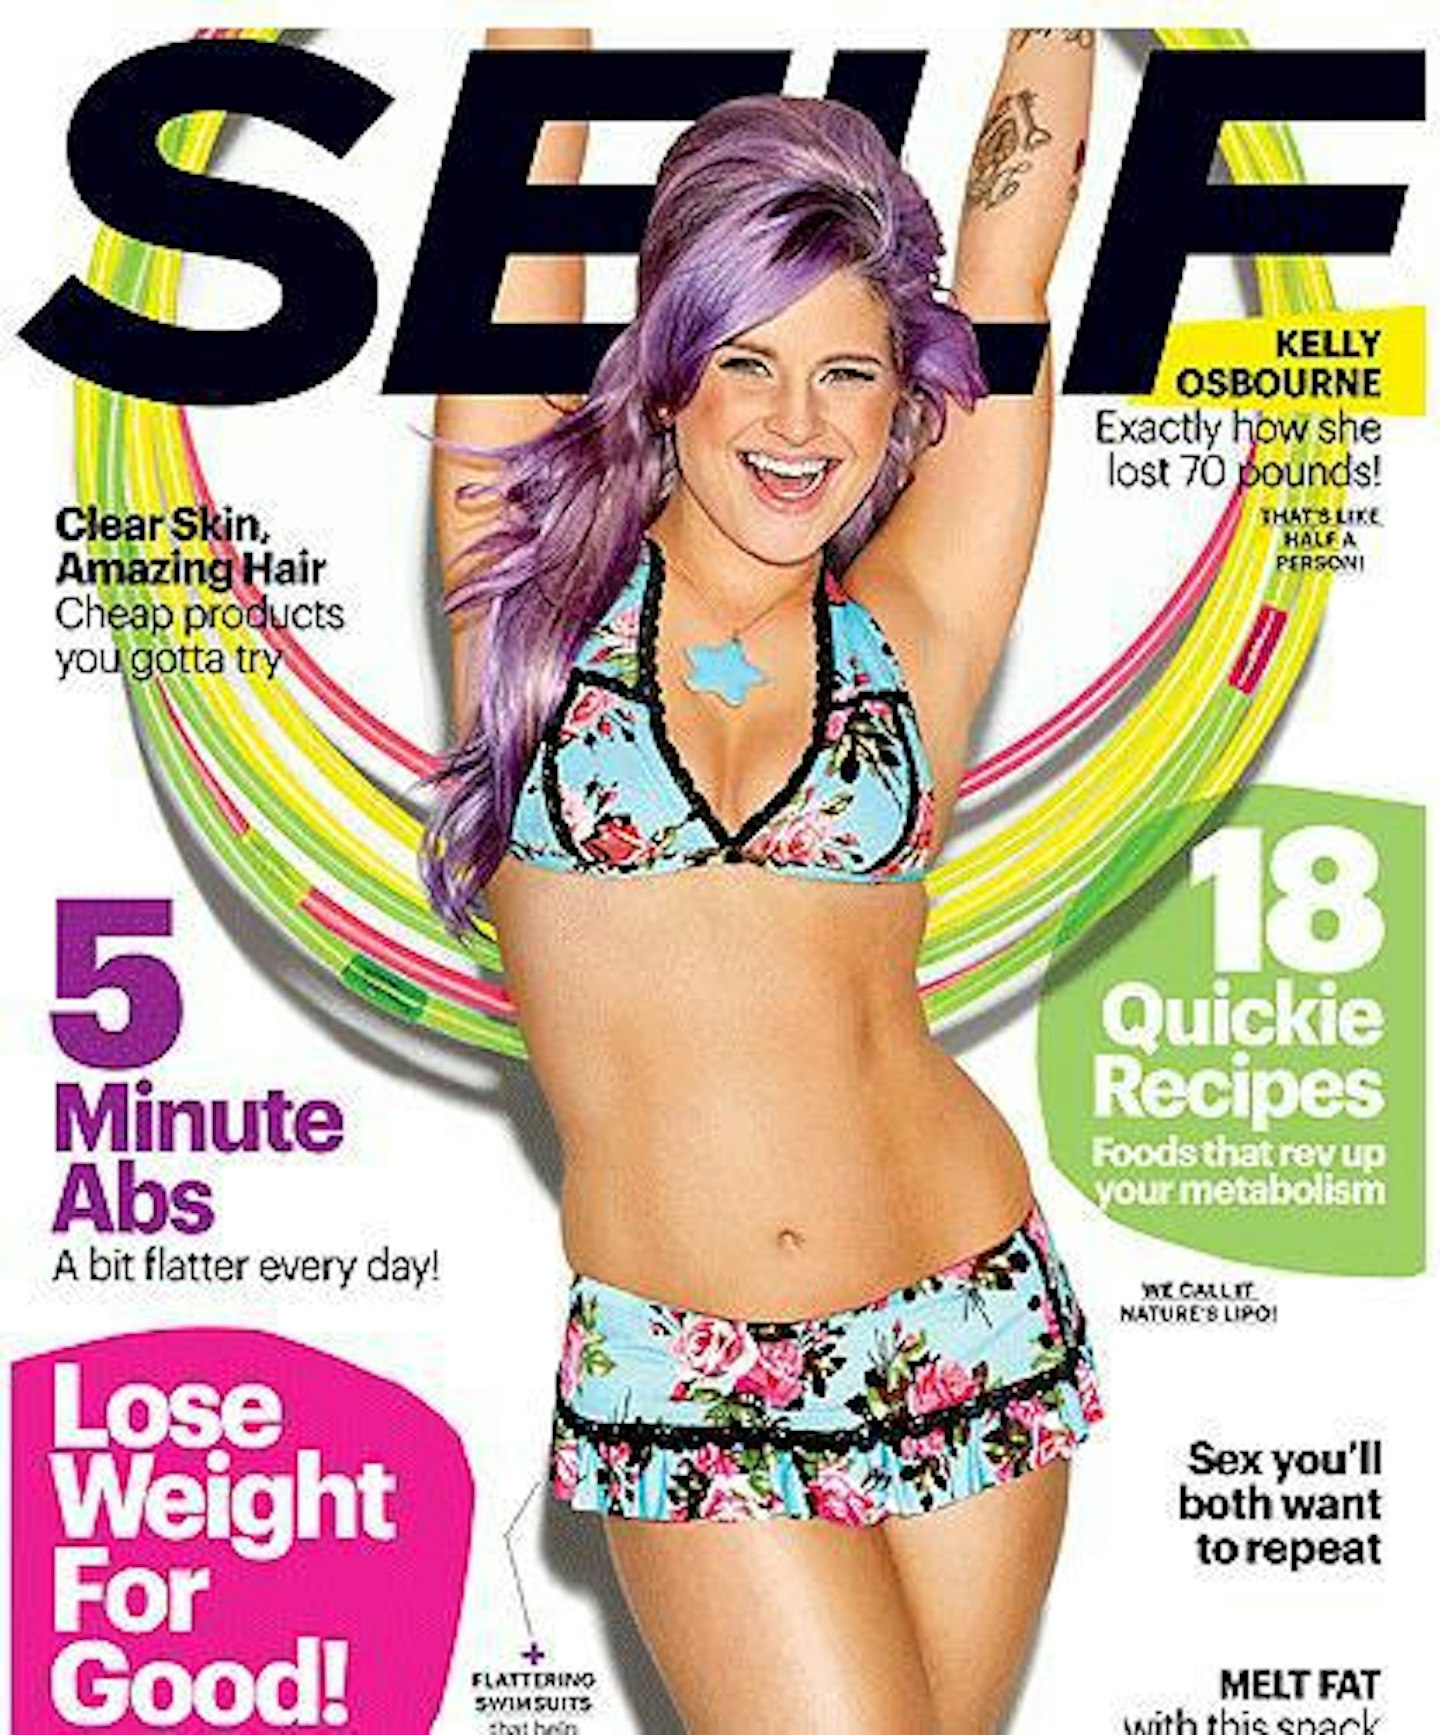 Kelly on the cover of self magazine